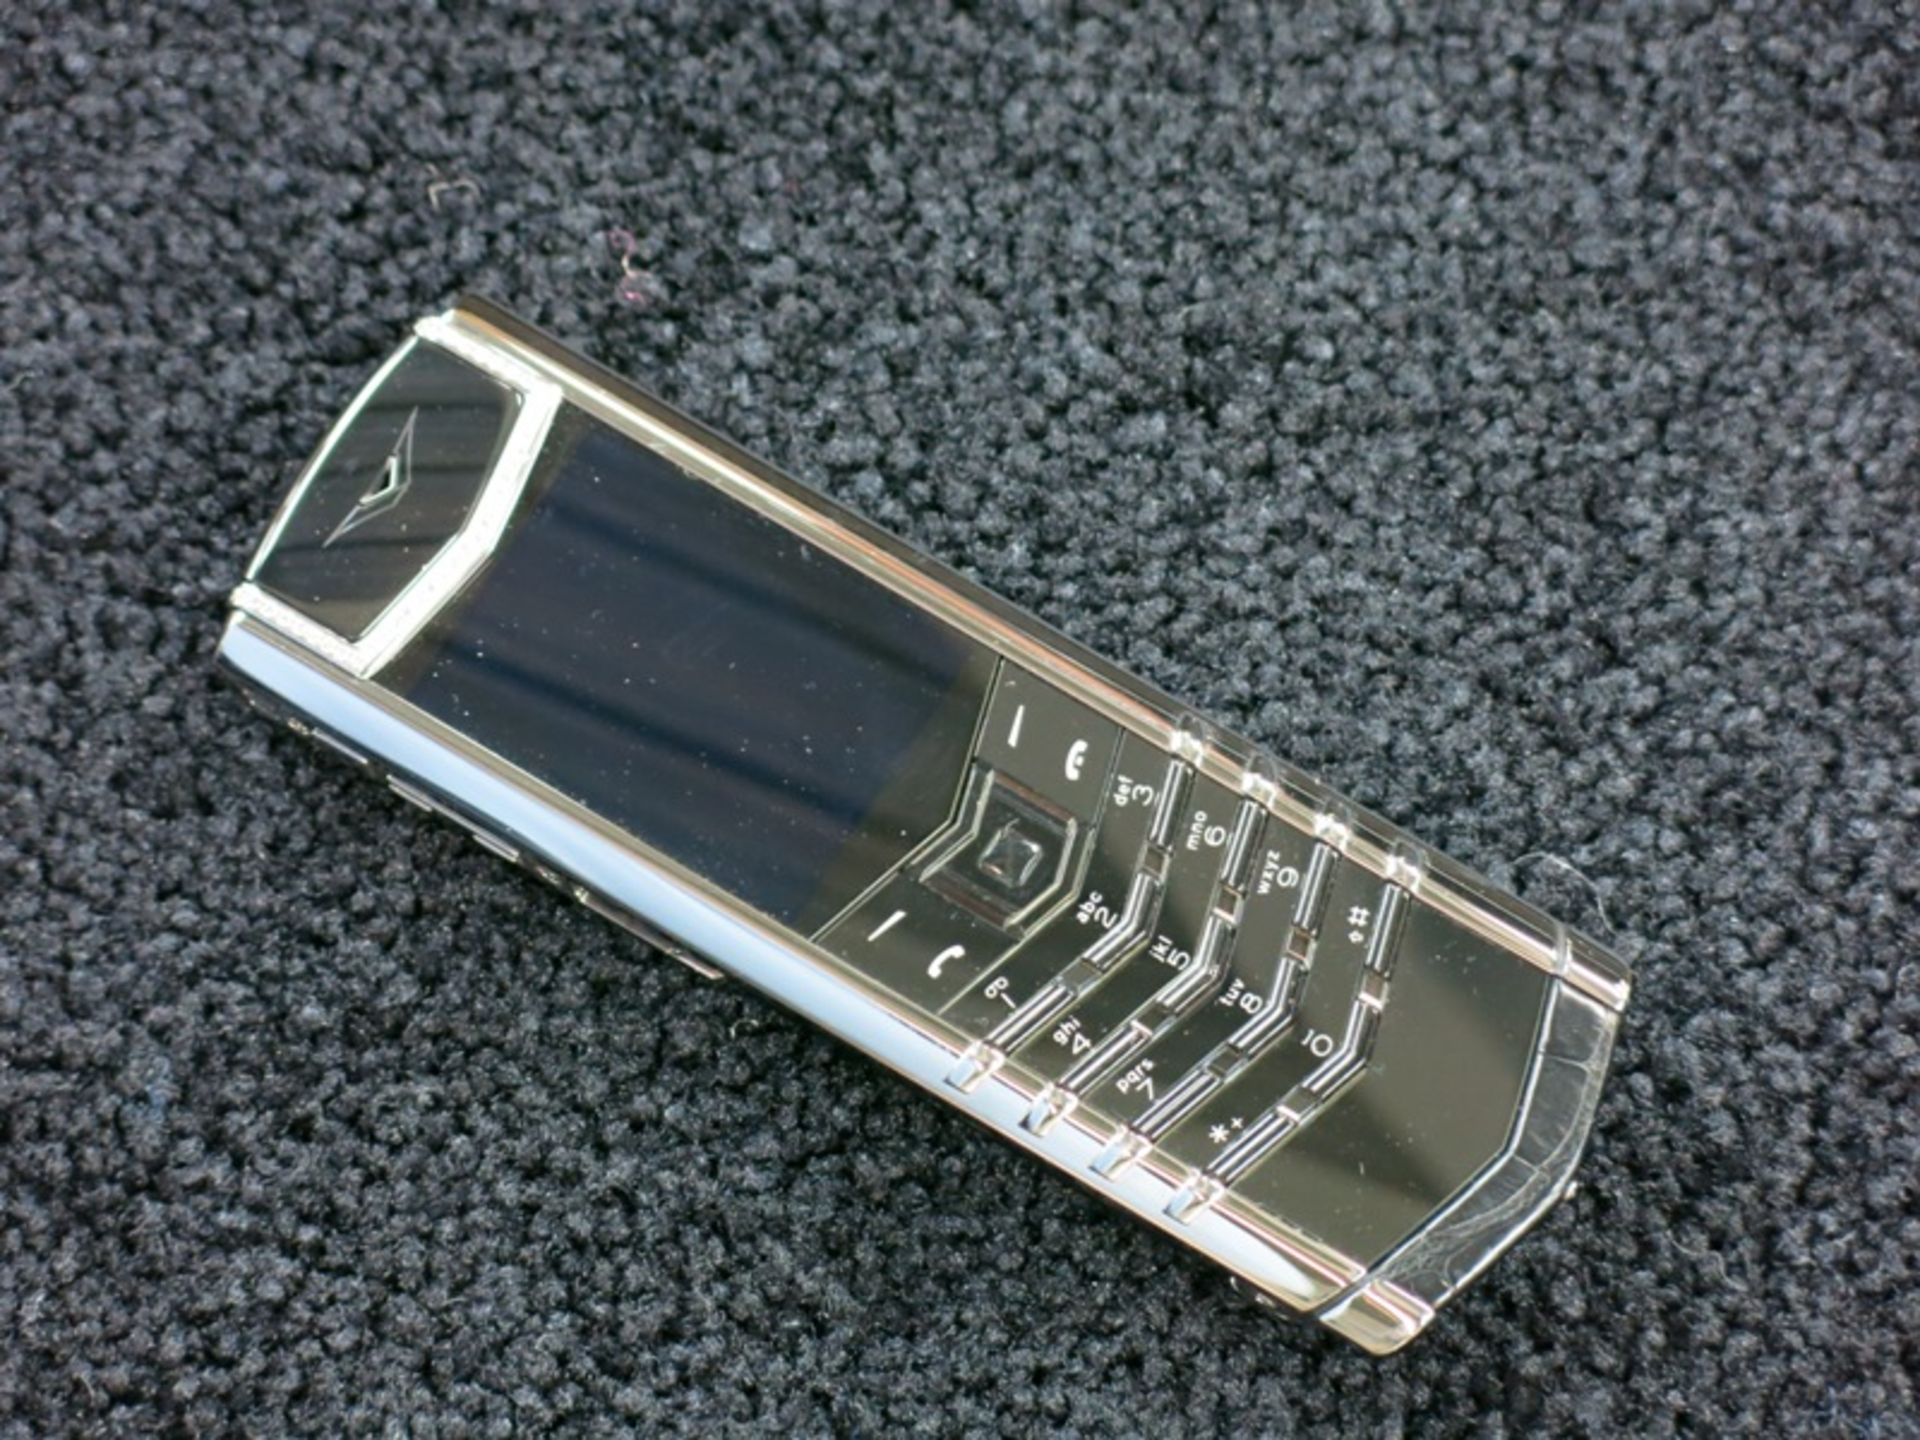 Vertu Signature S Phone with Diamond Pillow Frame & Polished Stainless. Furnished with Ceramic